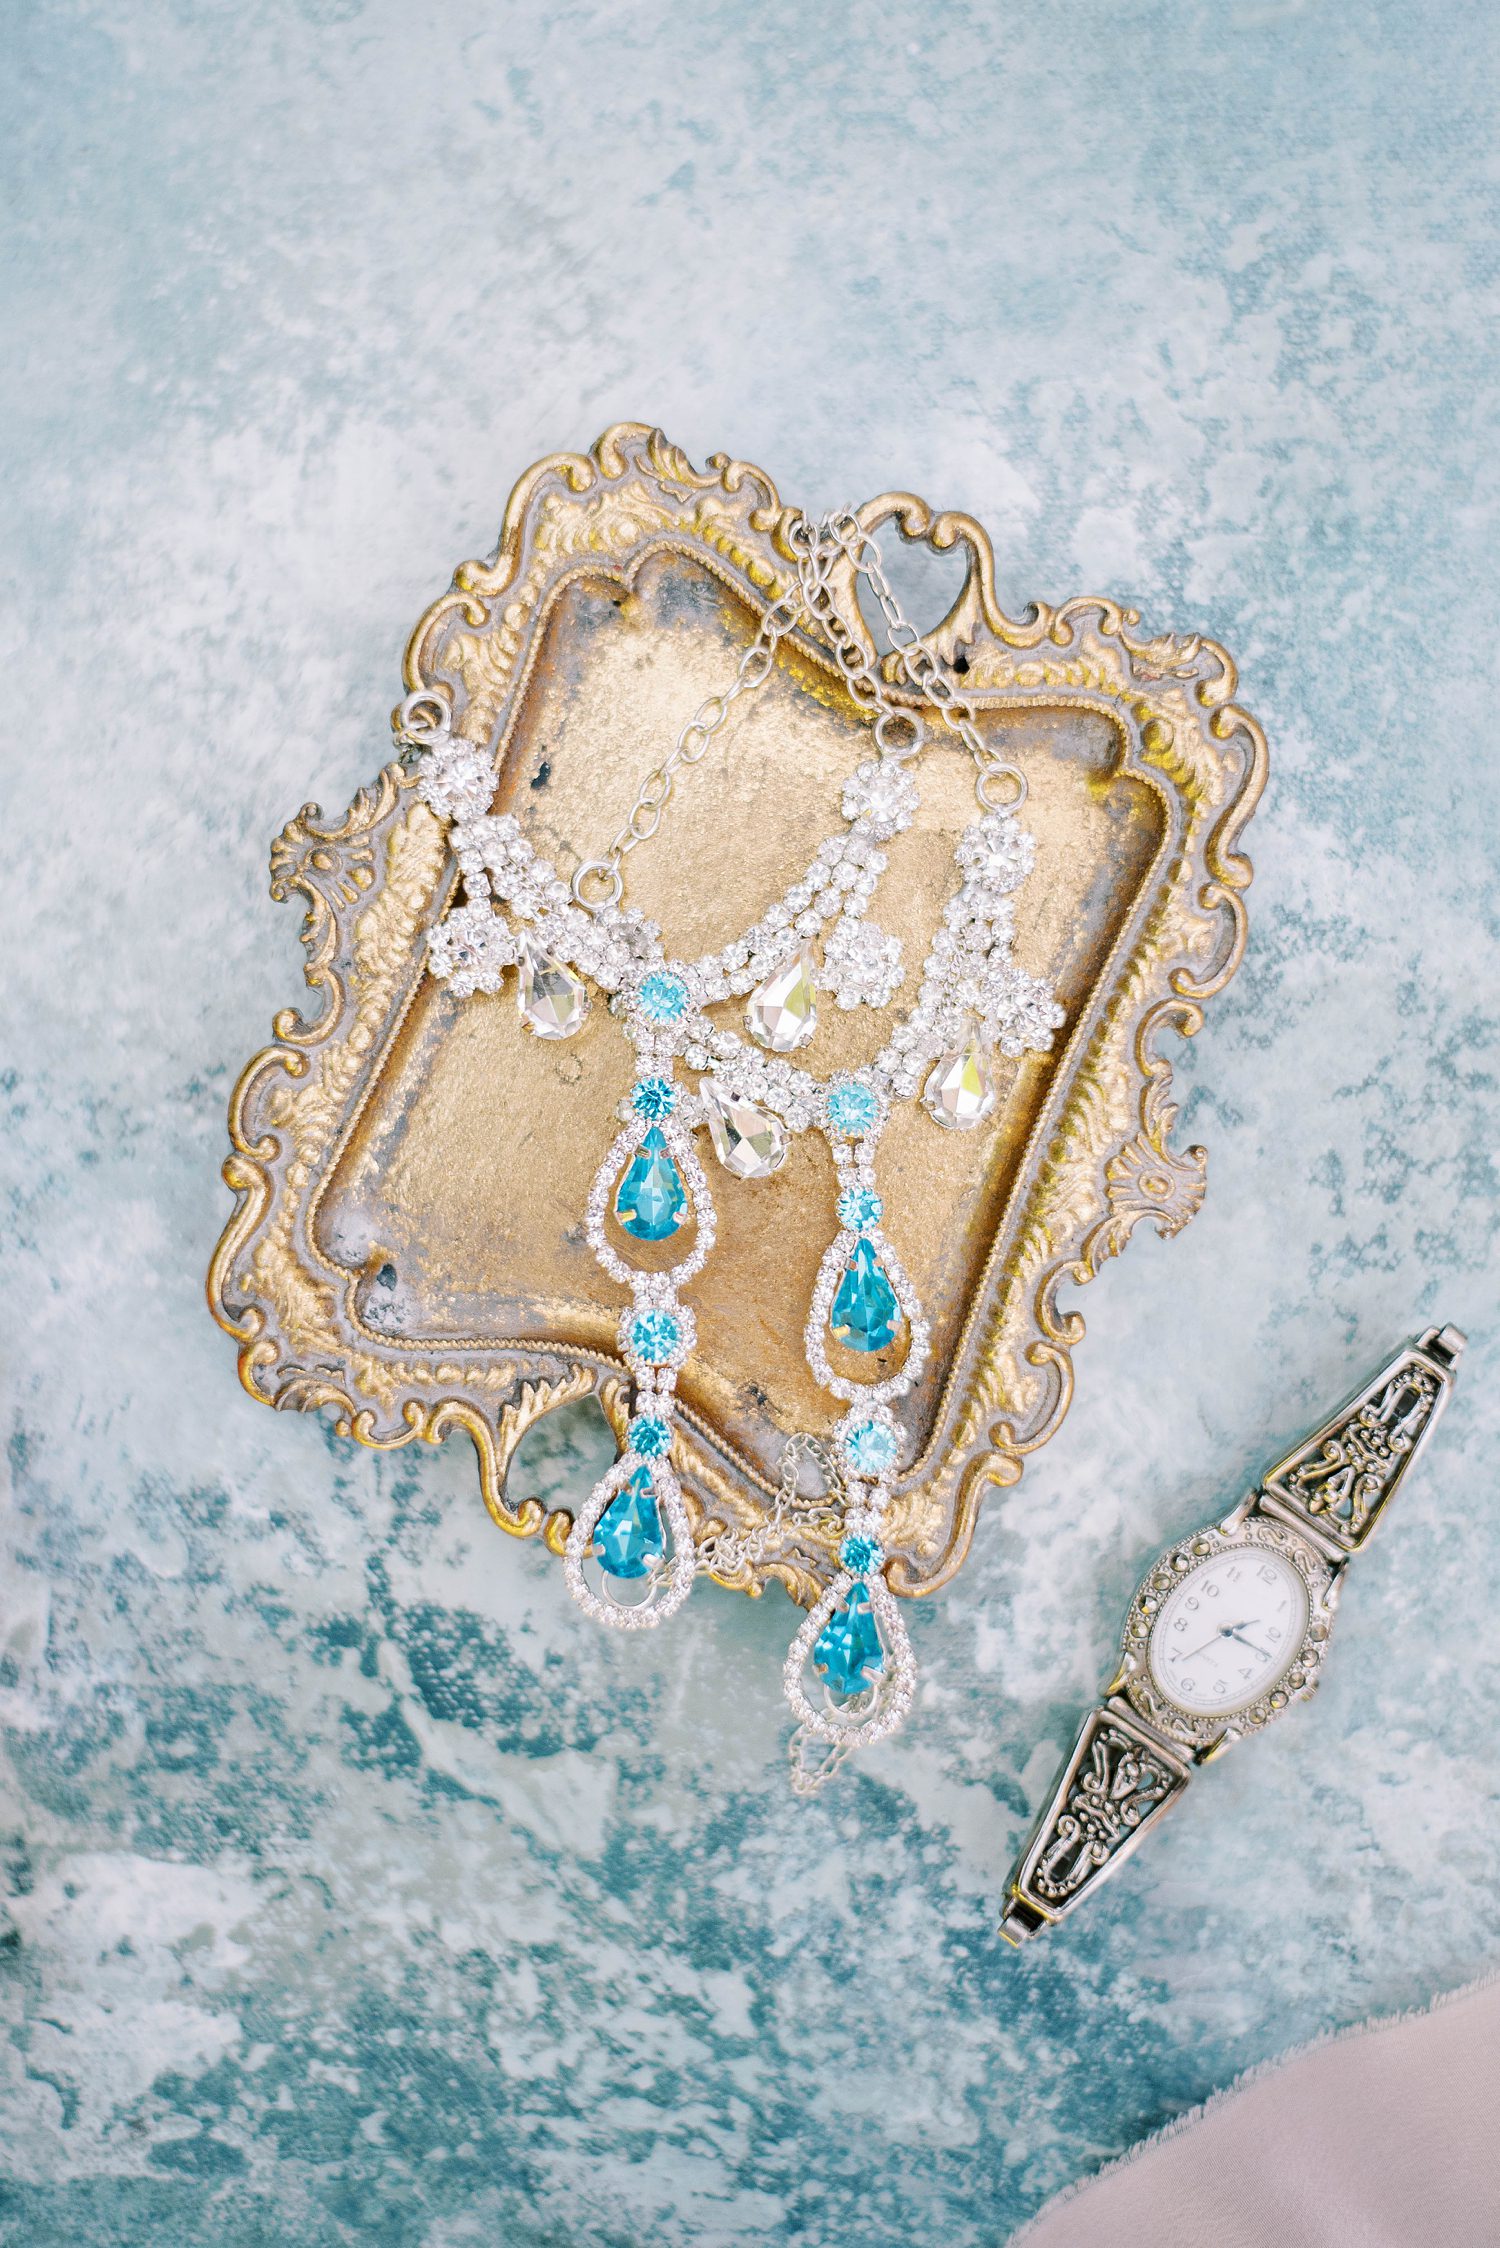 bride's blue and silver jewelry lays on gold tray